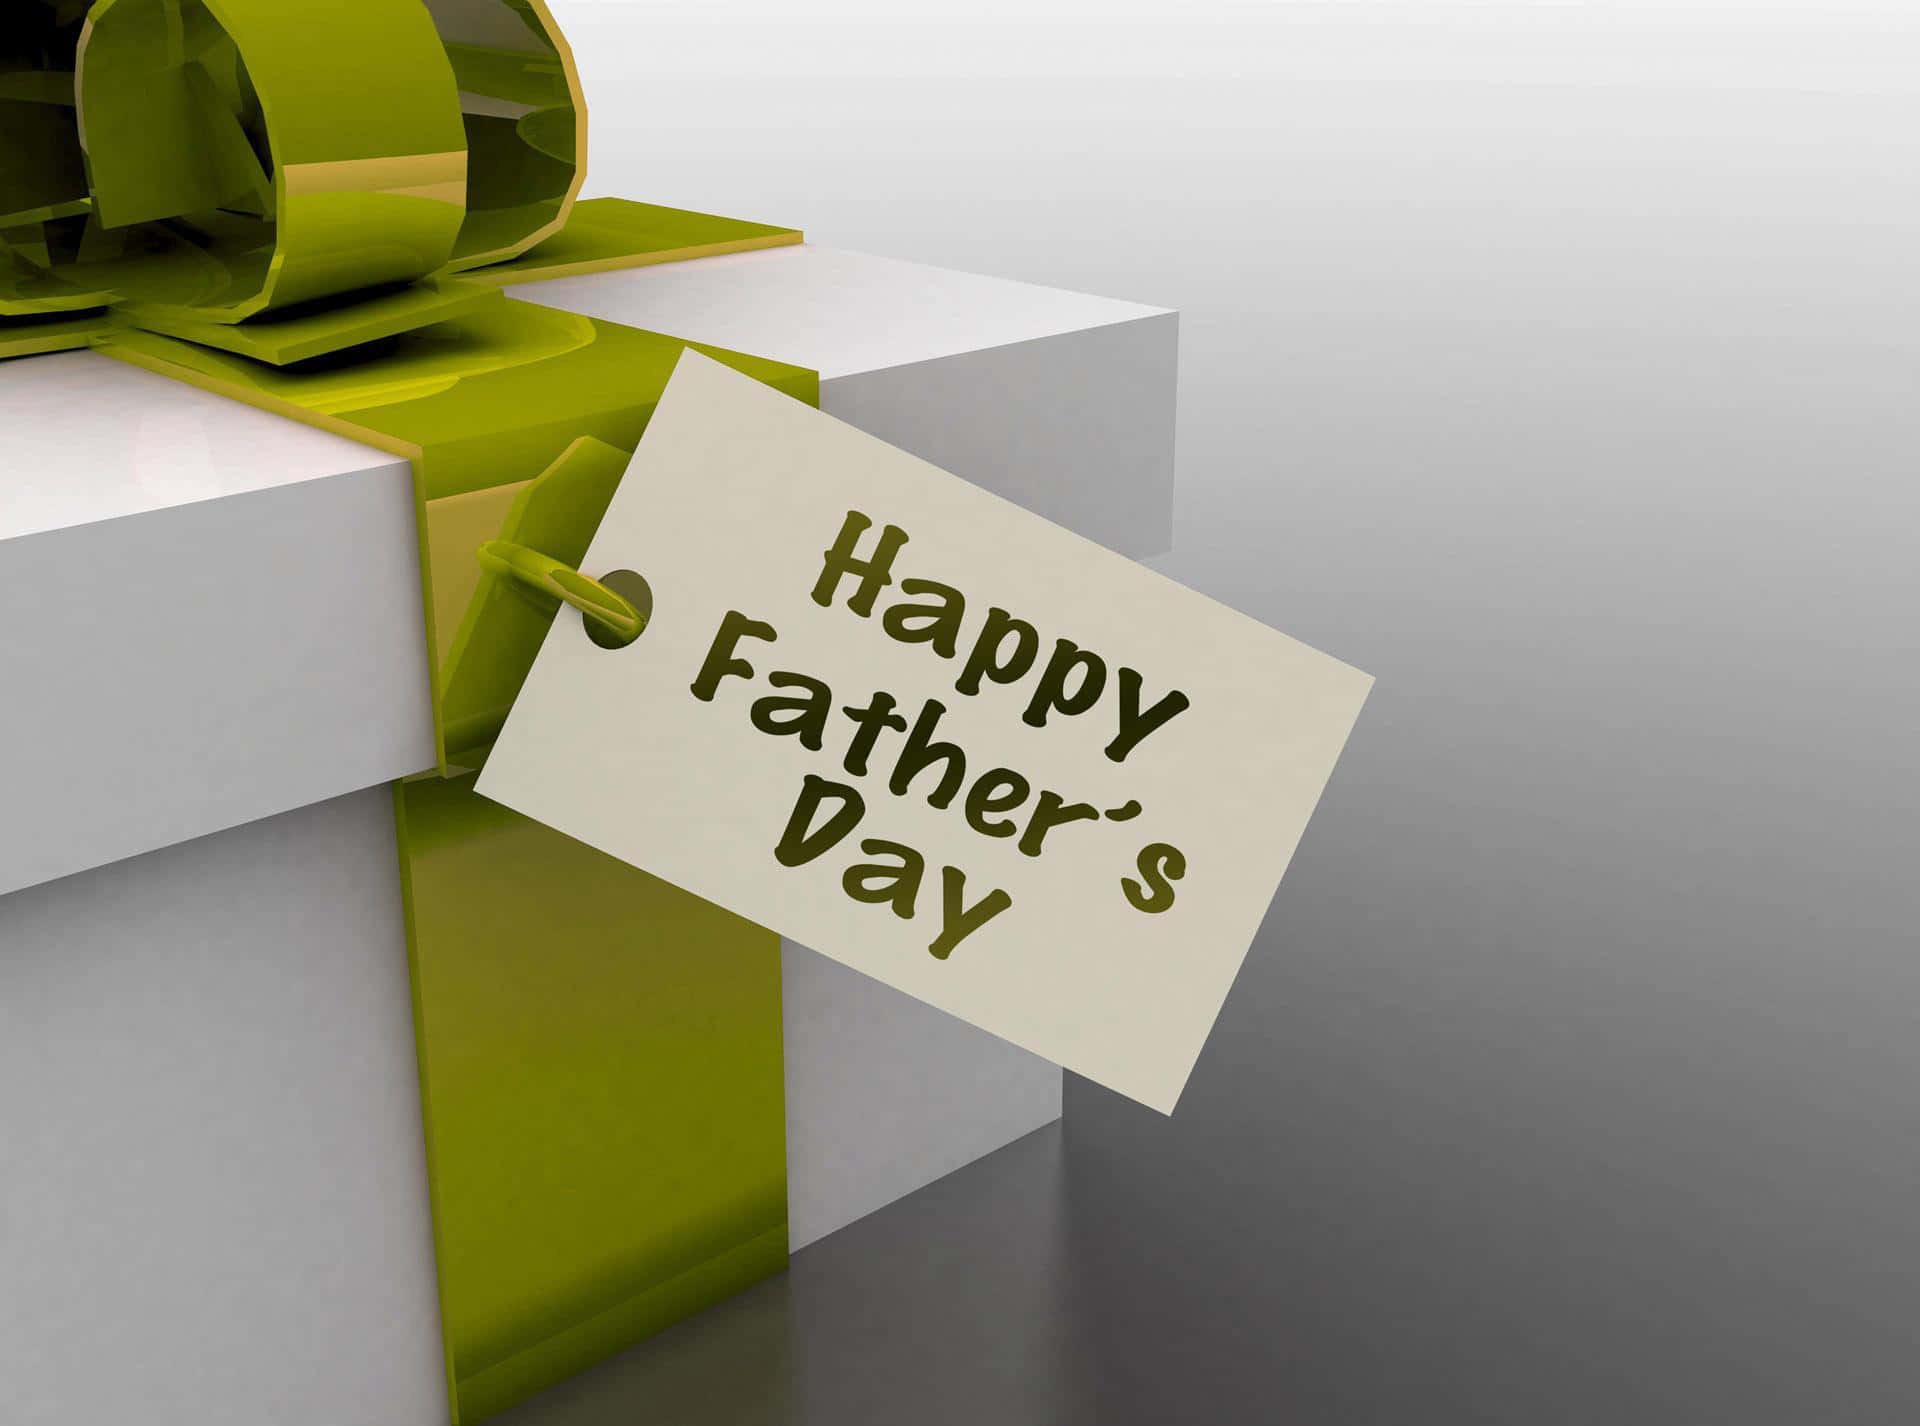 "Wish your dad a Happy Father's Day!"